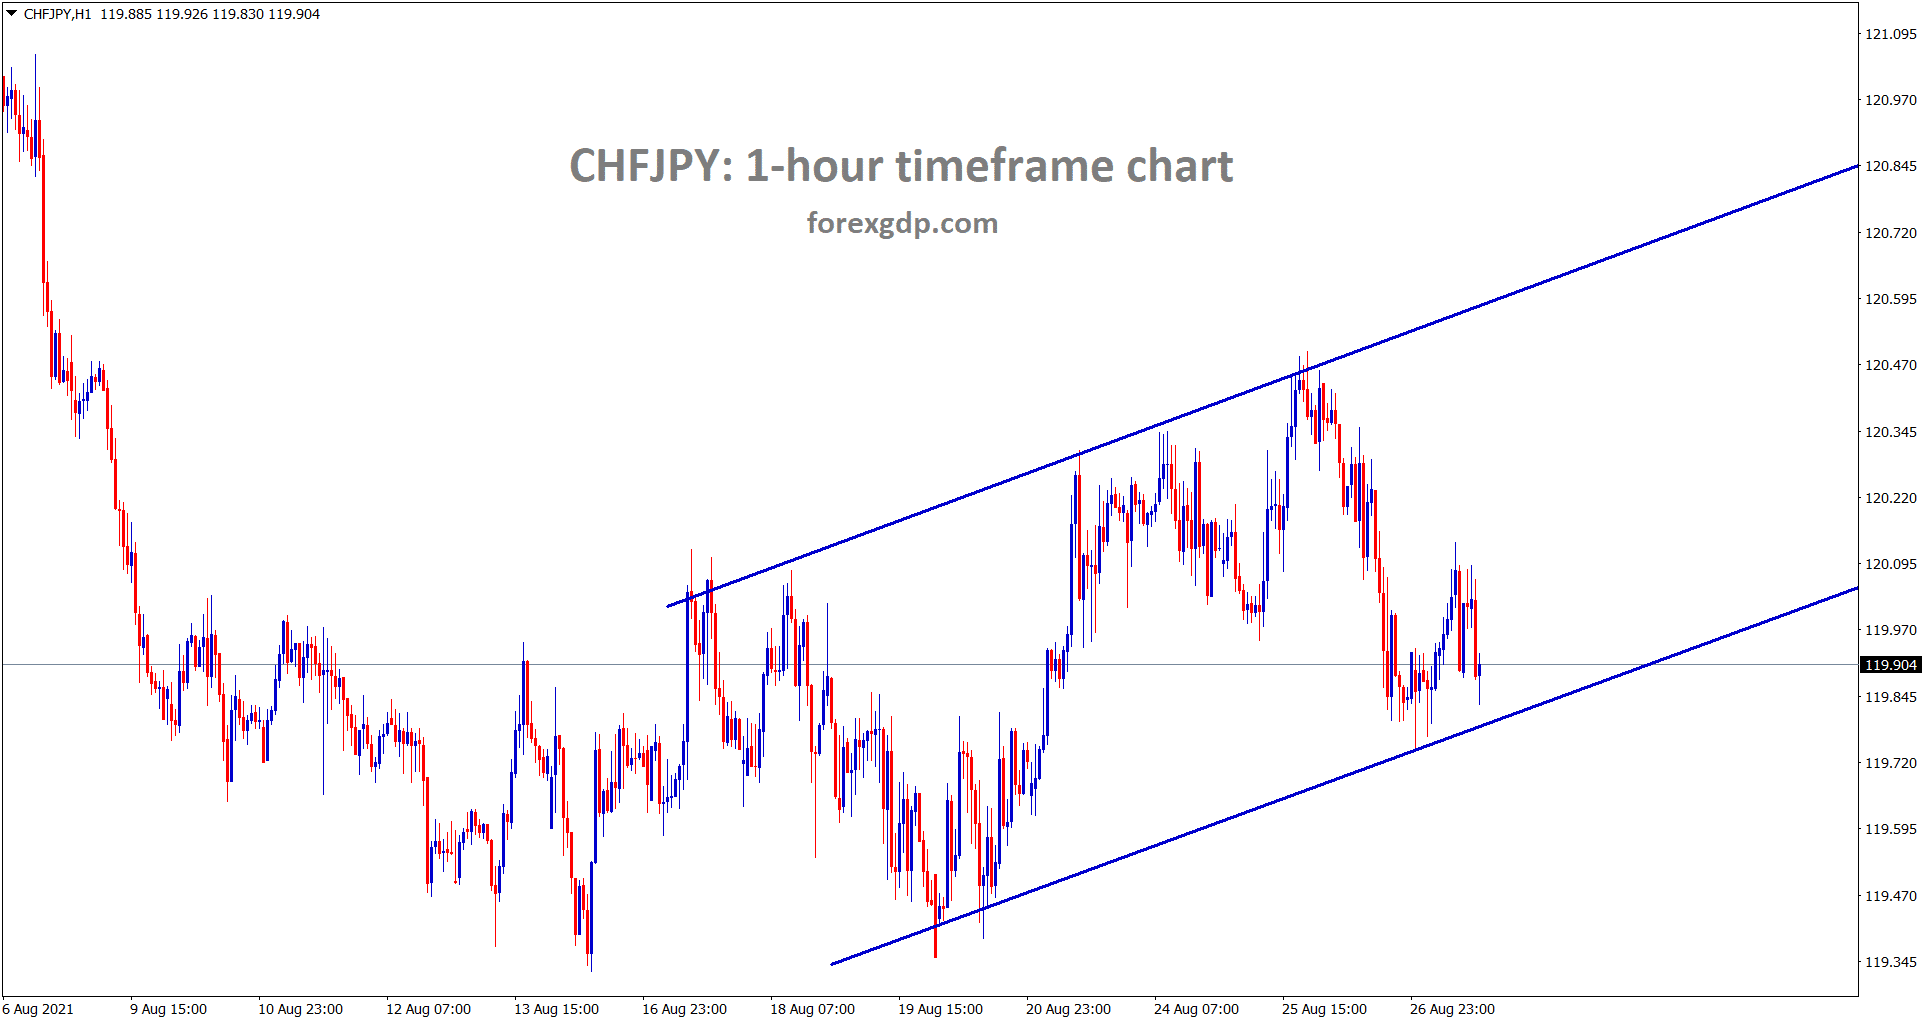 CHFJPY is consolidating between the ranges in the h1 chart